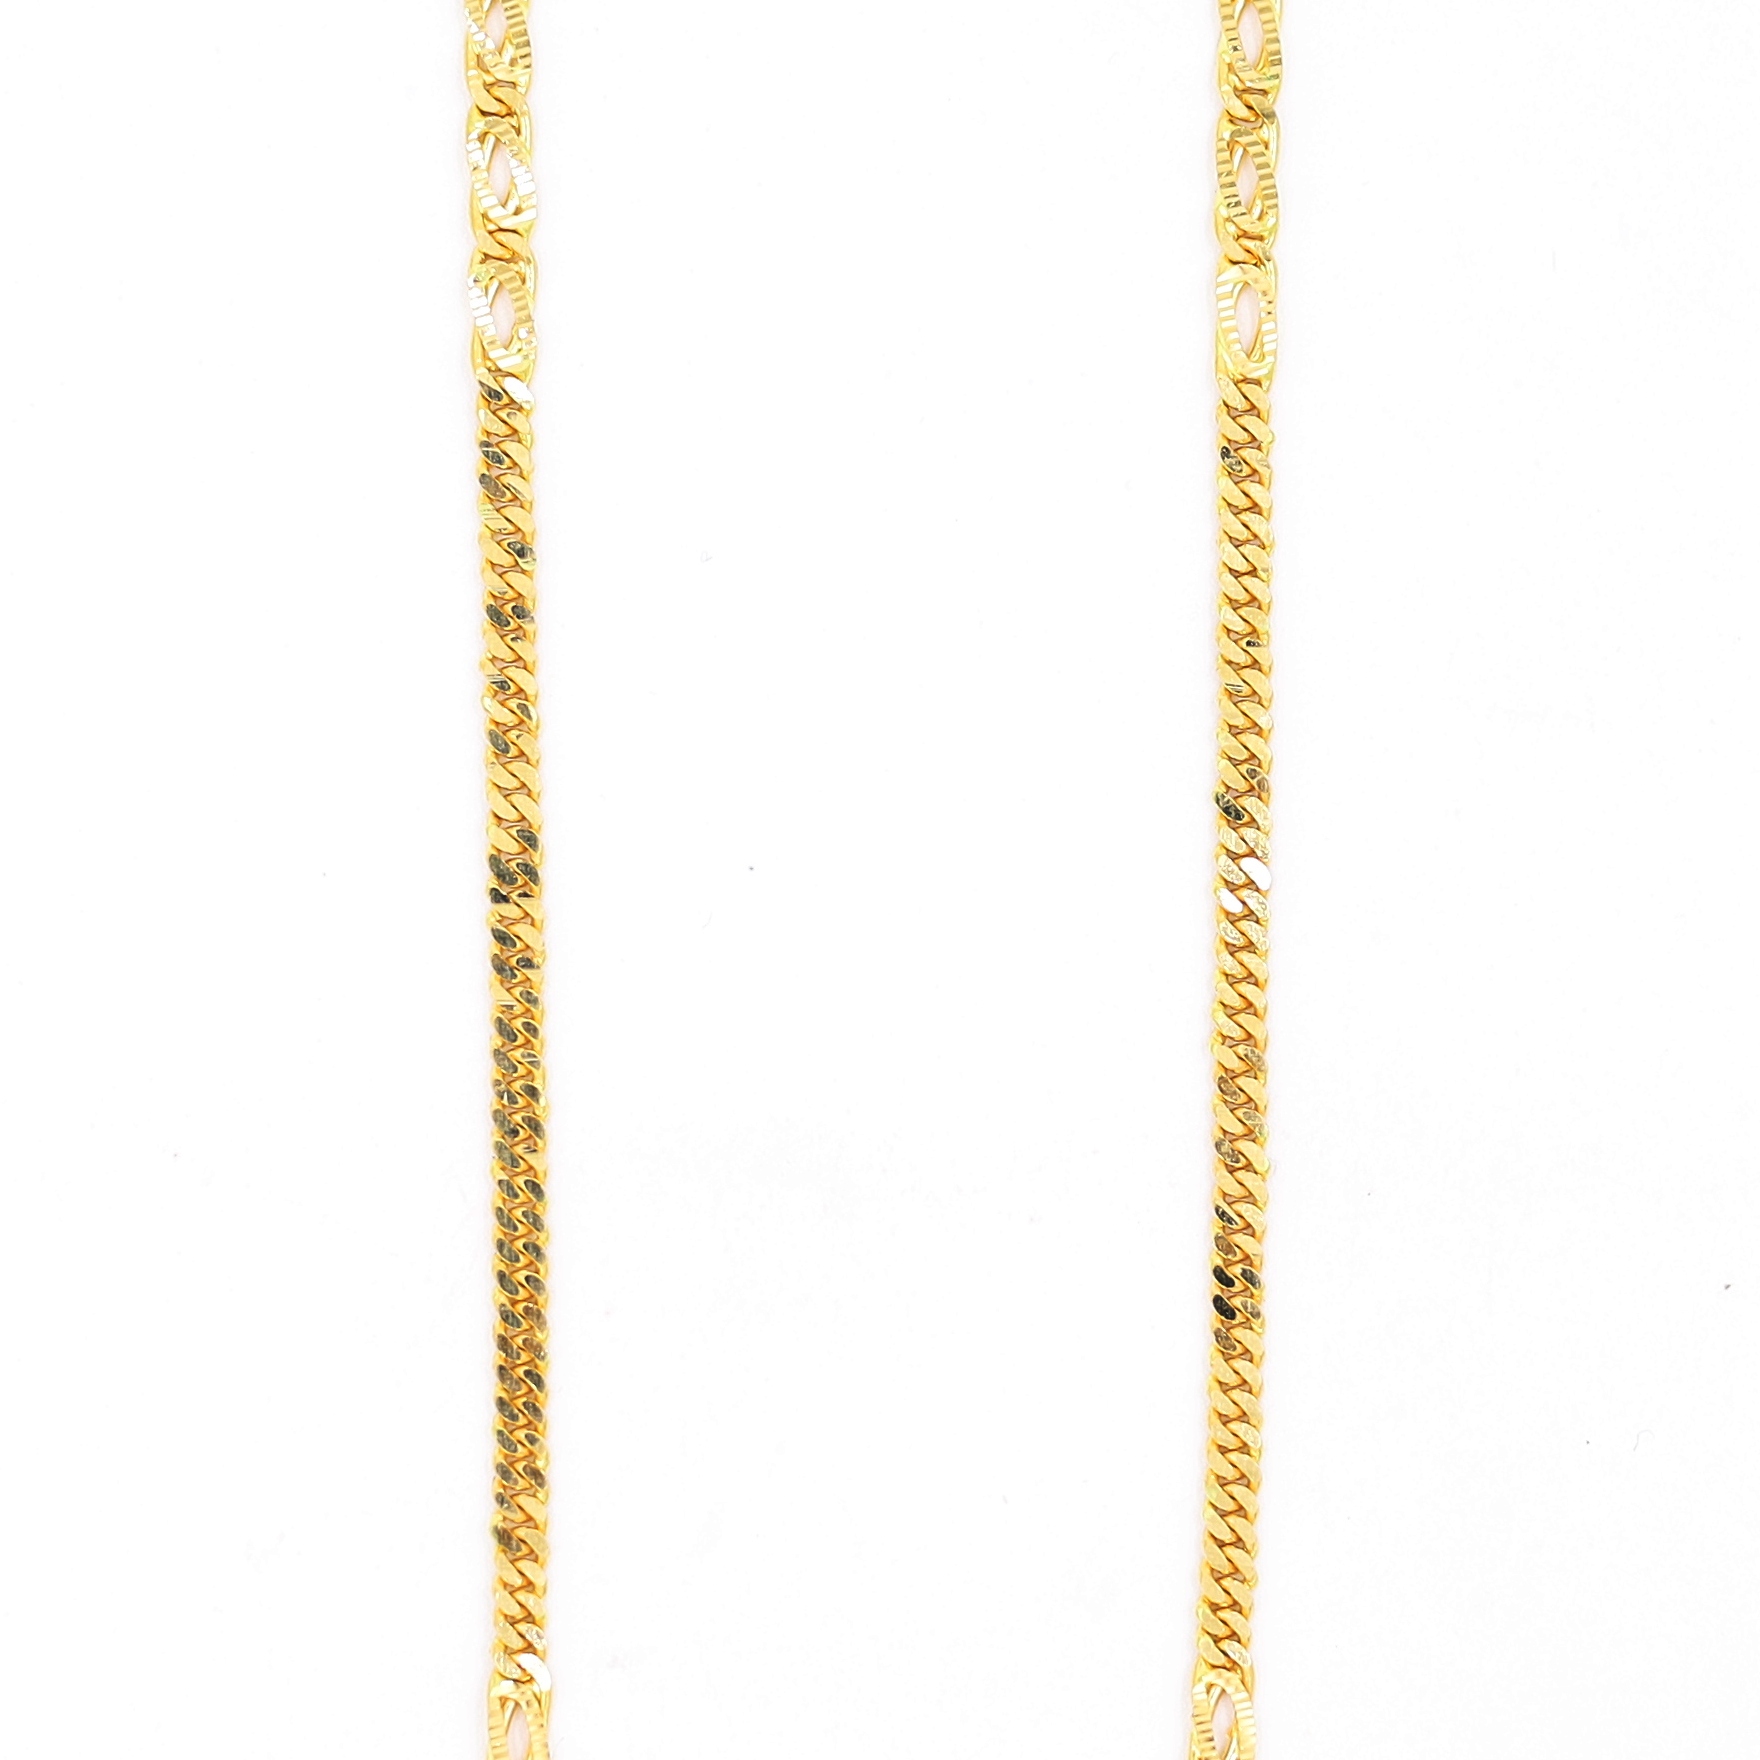 Hand Made Gold Chain For Men